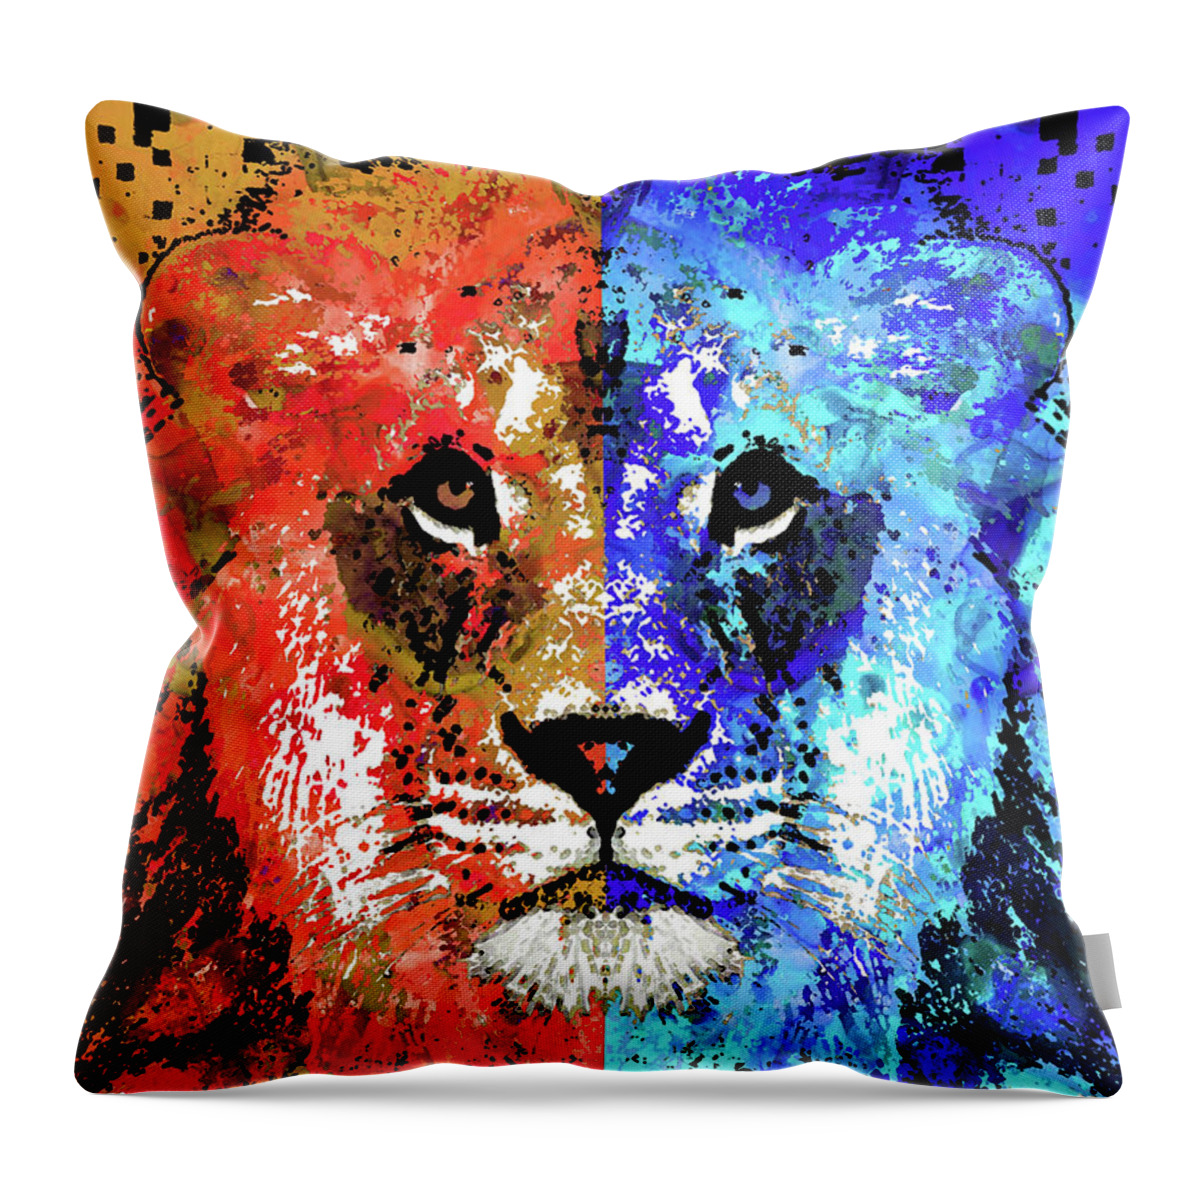 Lions Throw Pillow featuring the painting Lion Art - Majesty - Sharon Cummings by Sharon Cummings